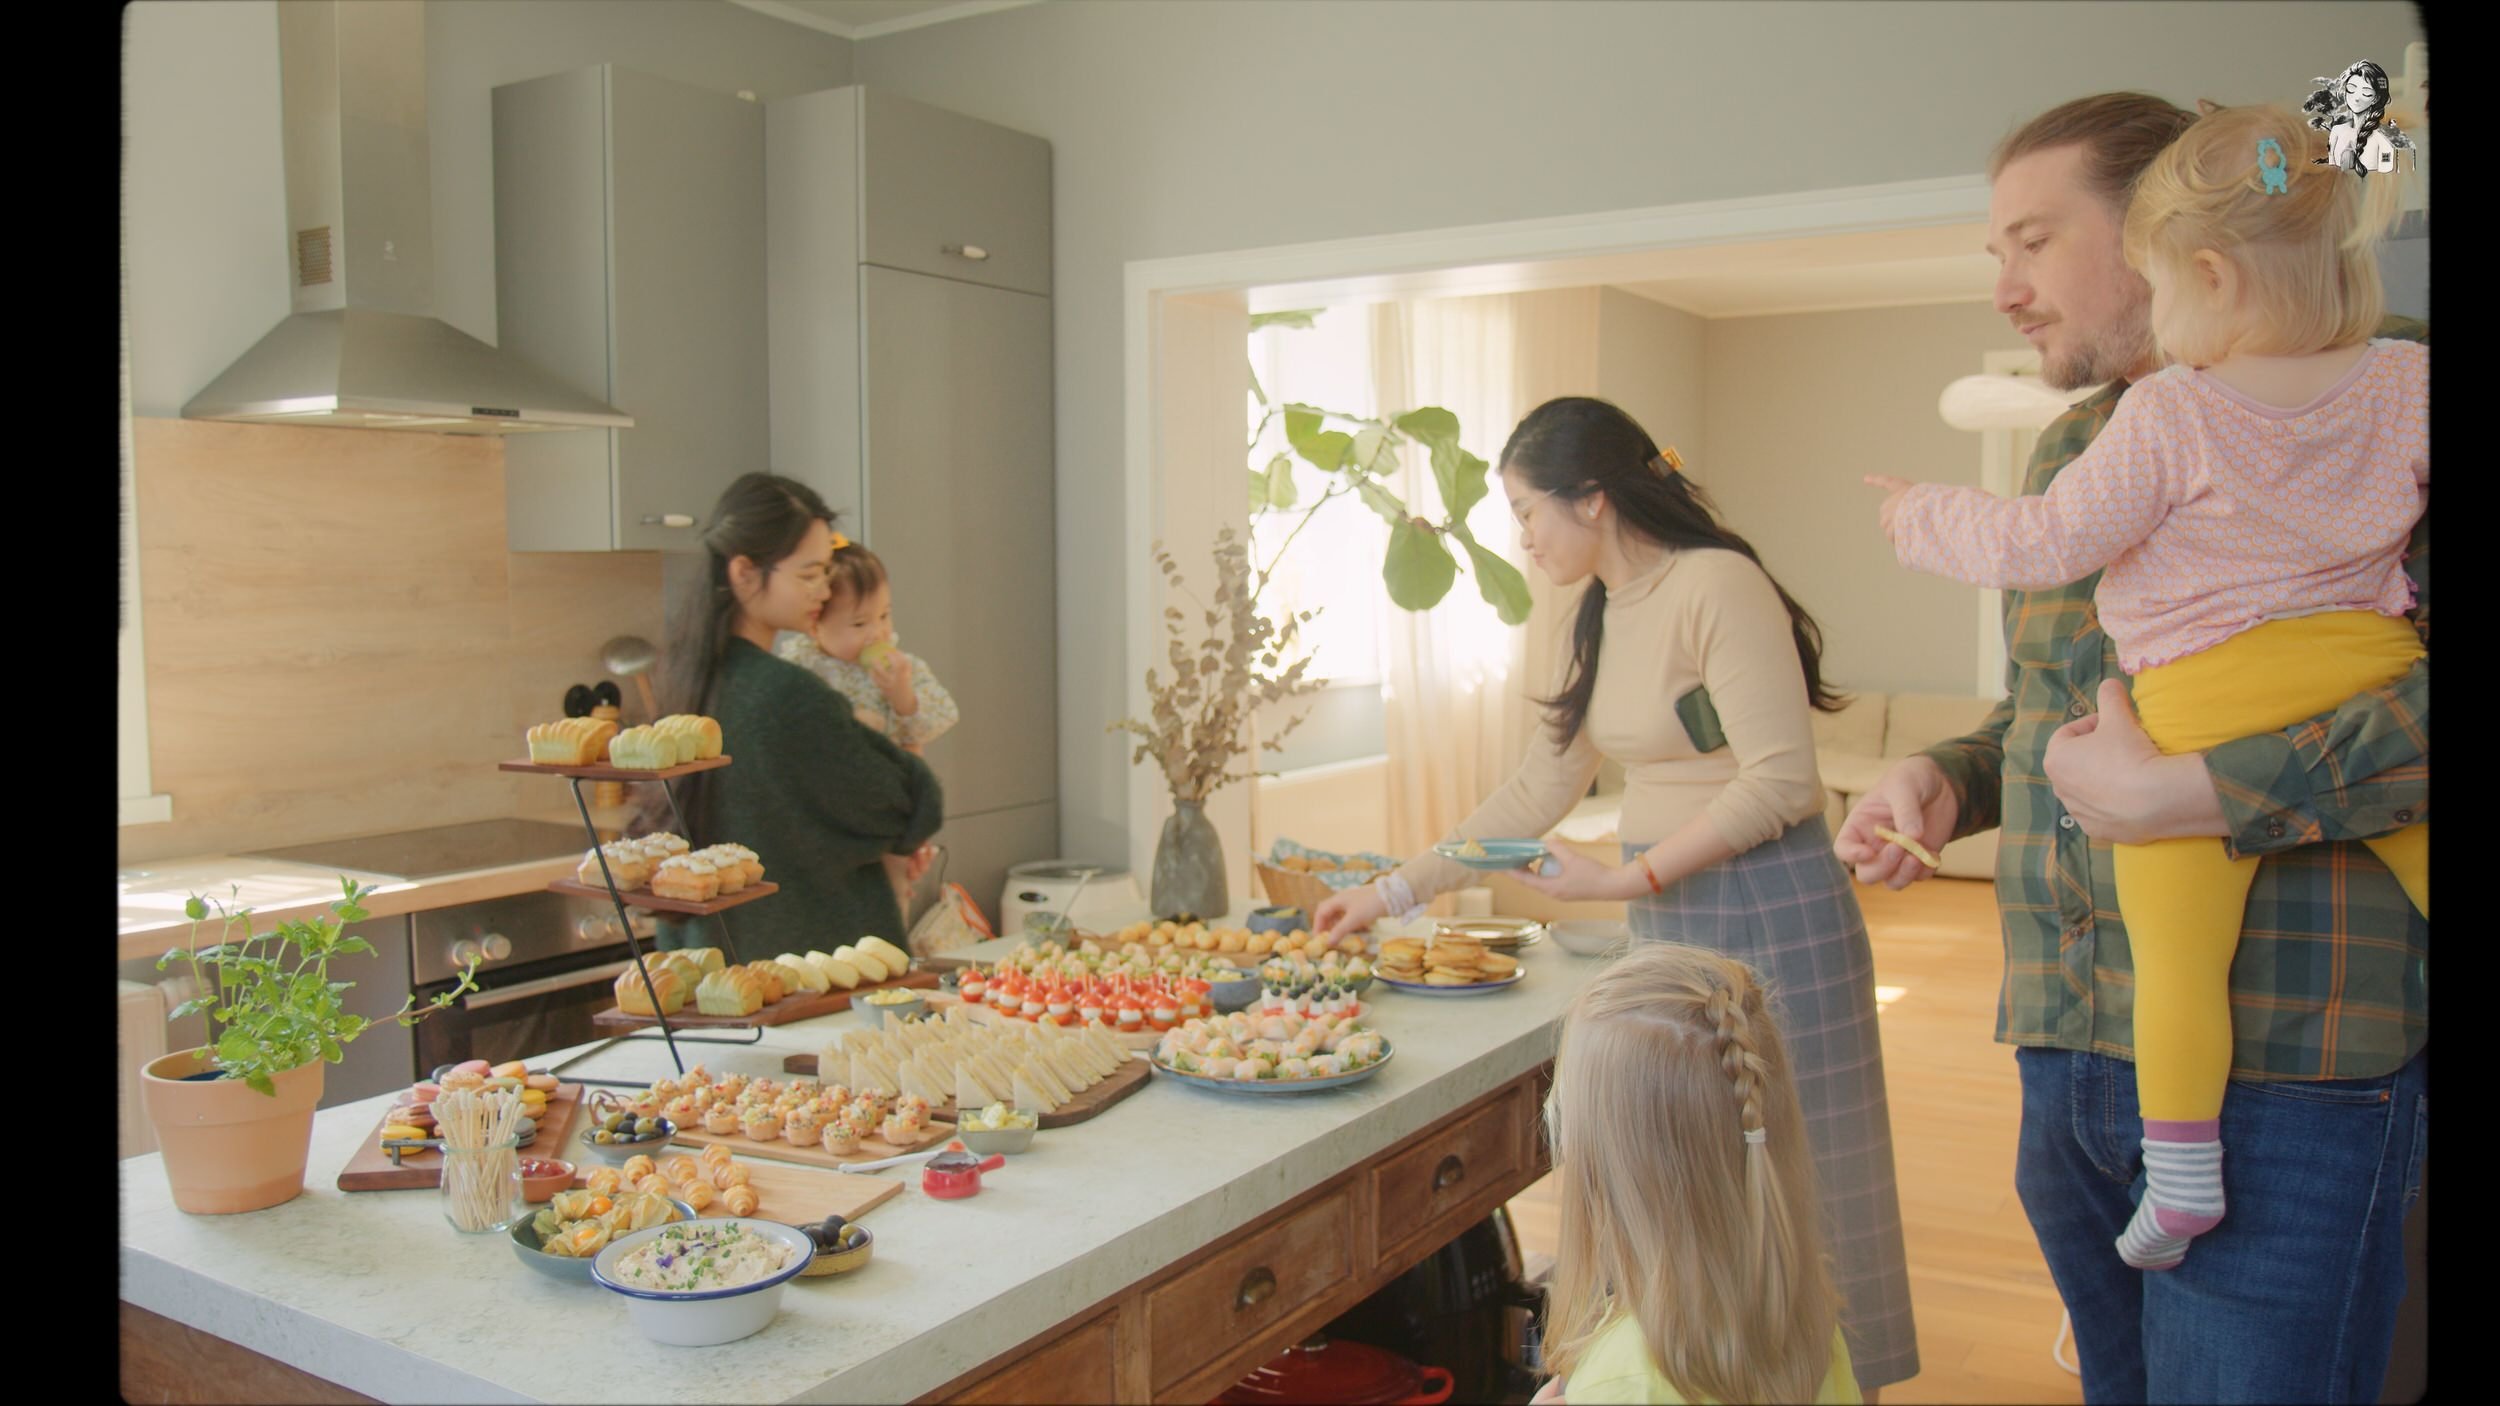 Small Bites Brunch Buffet Ideas for your next party - Her86m2 _1.265.1.jpg